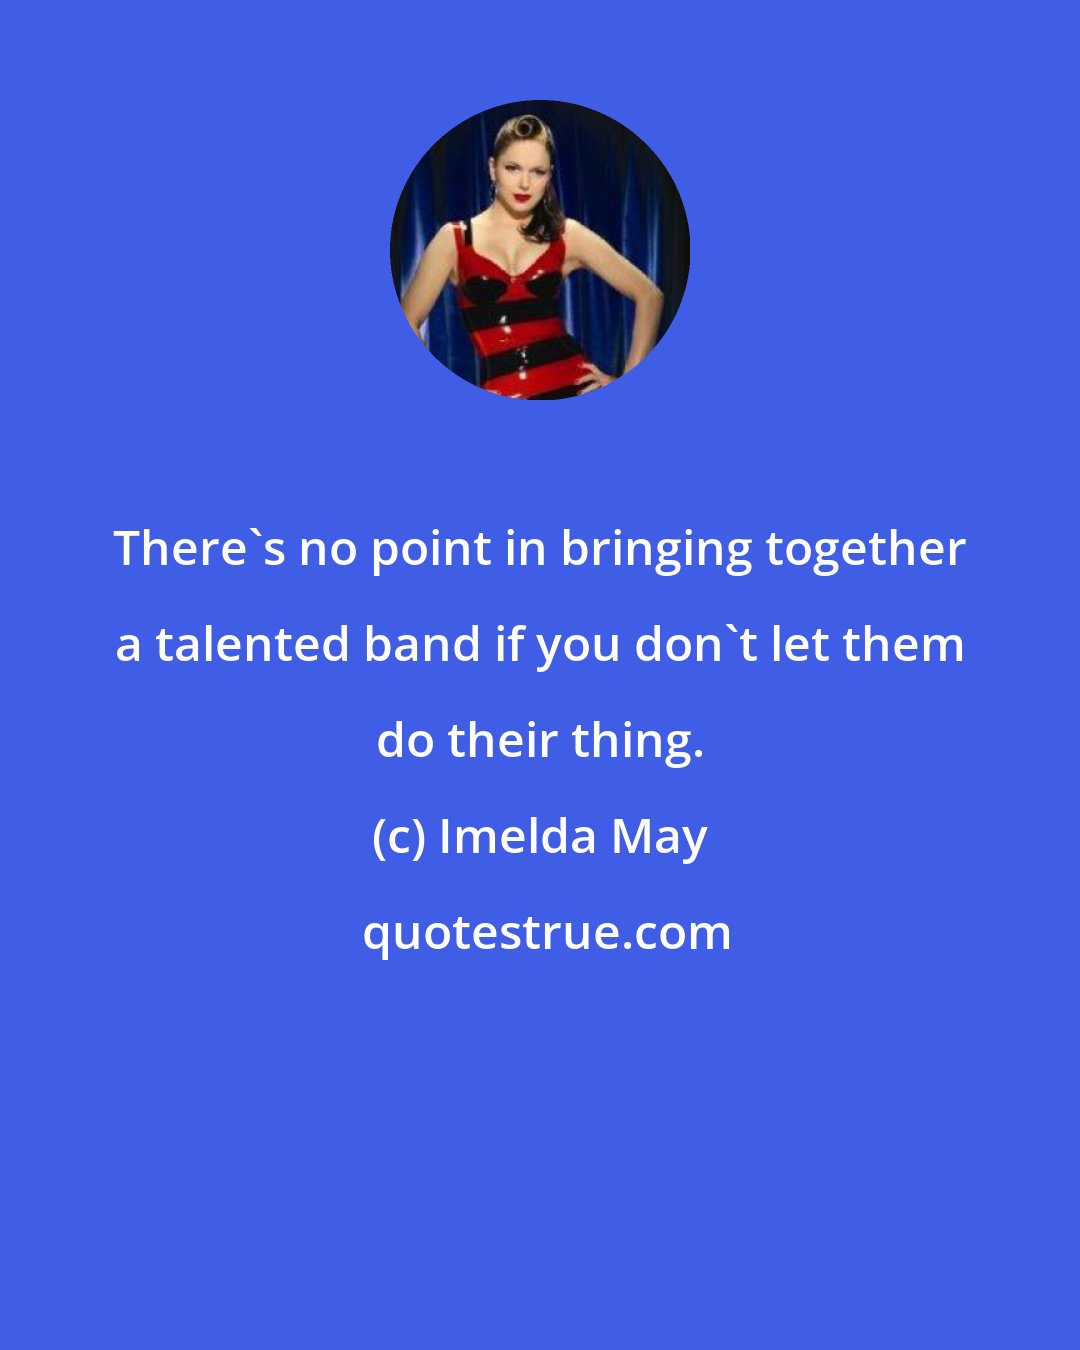 Imelda May: There's no point in bringing together a talented band if you don't let them do their thing.